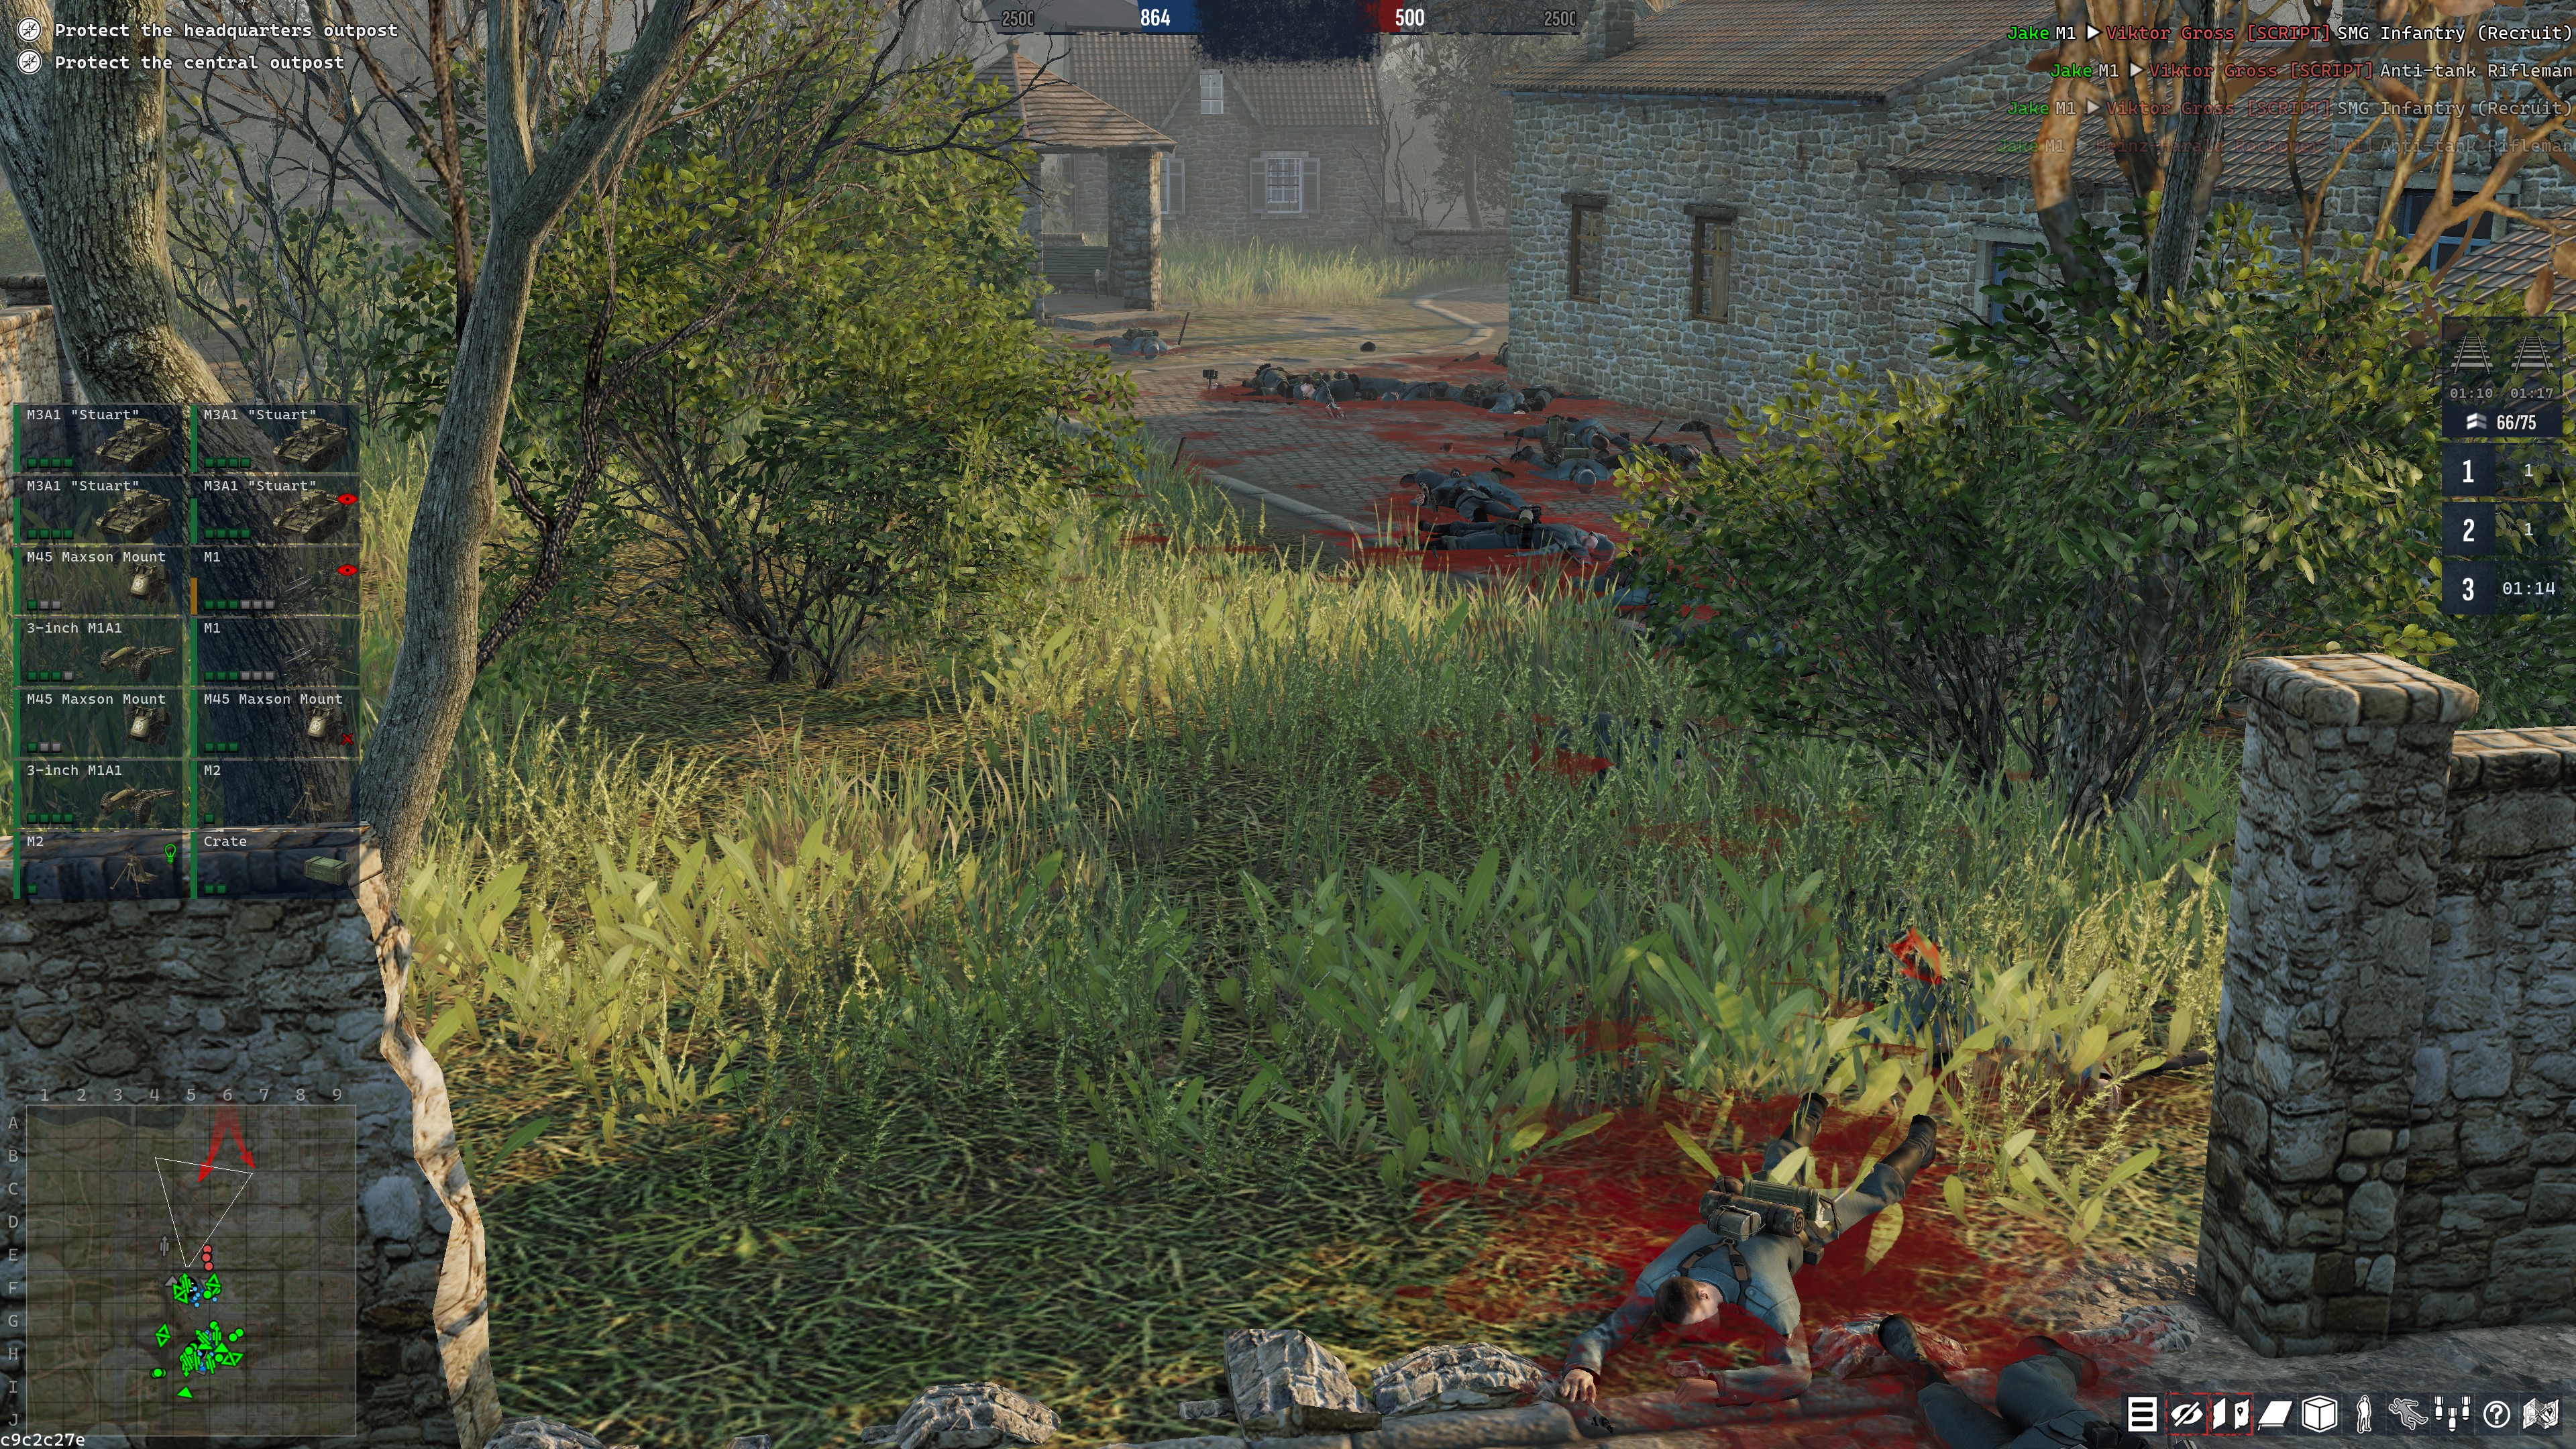 Lots of bloody corpses